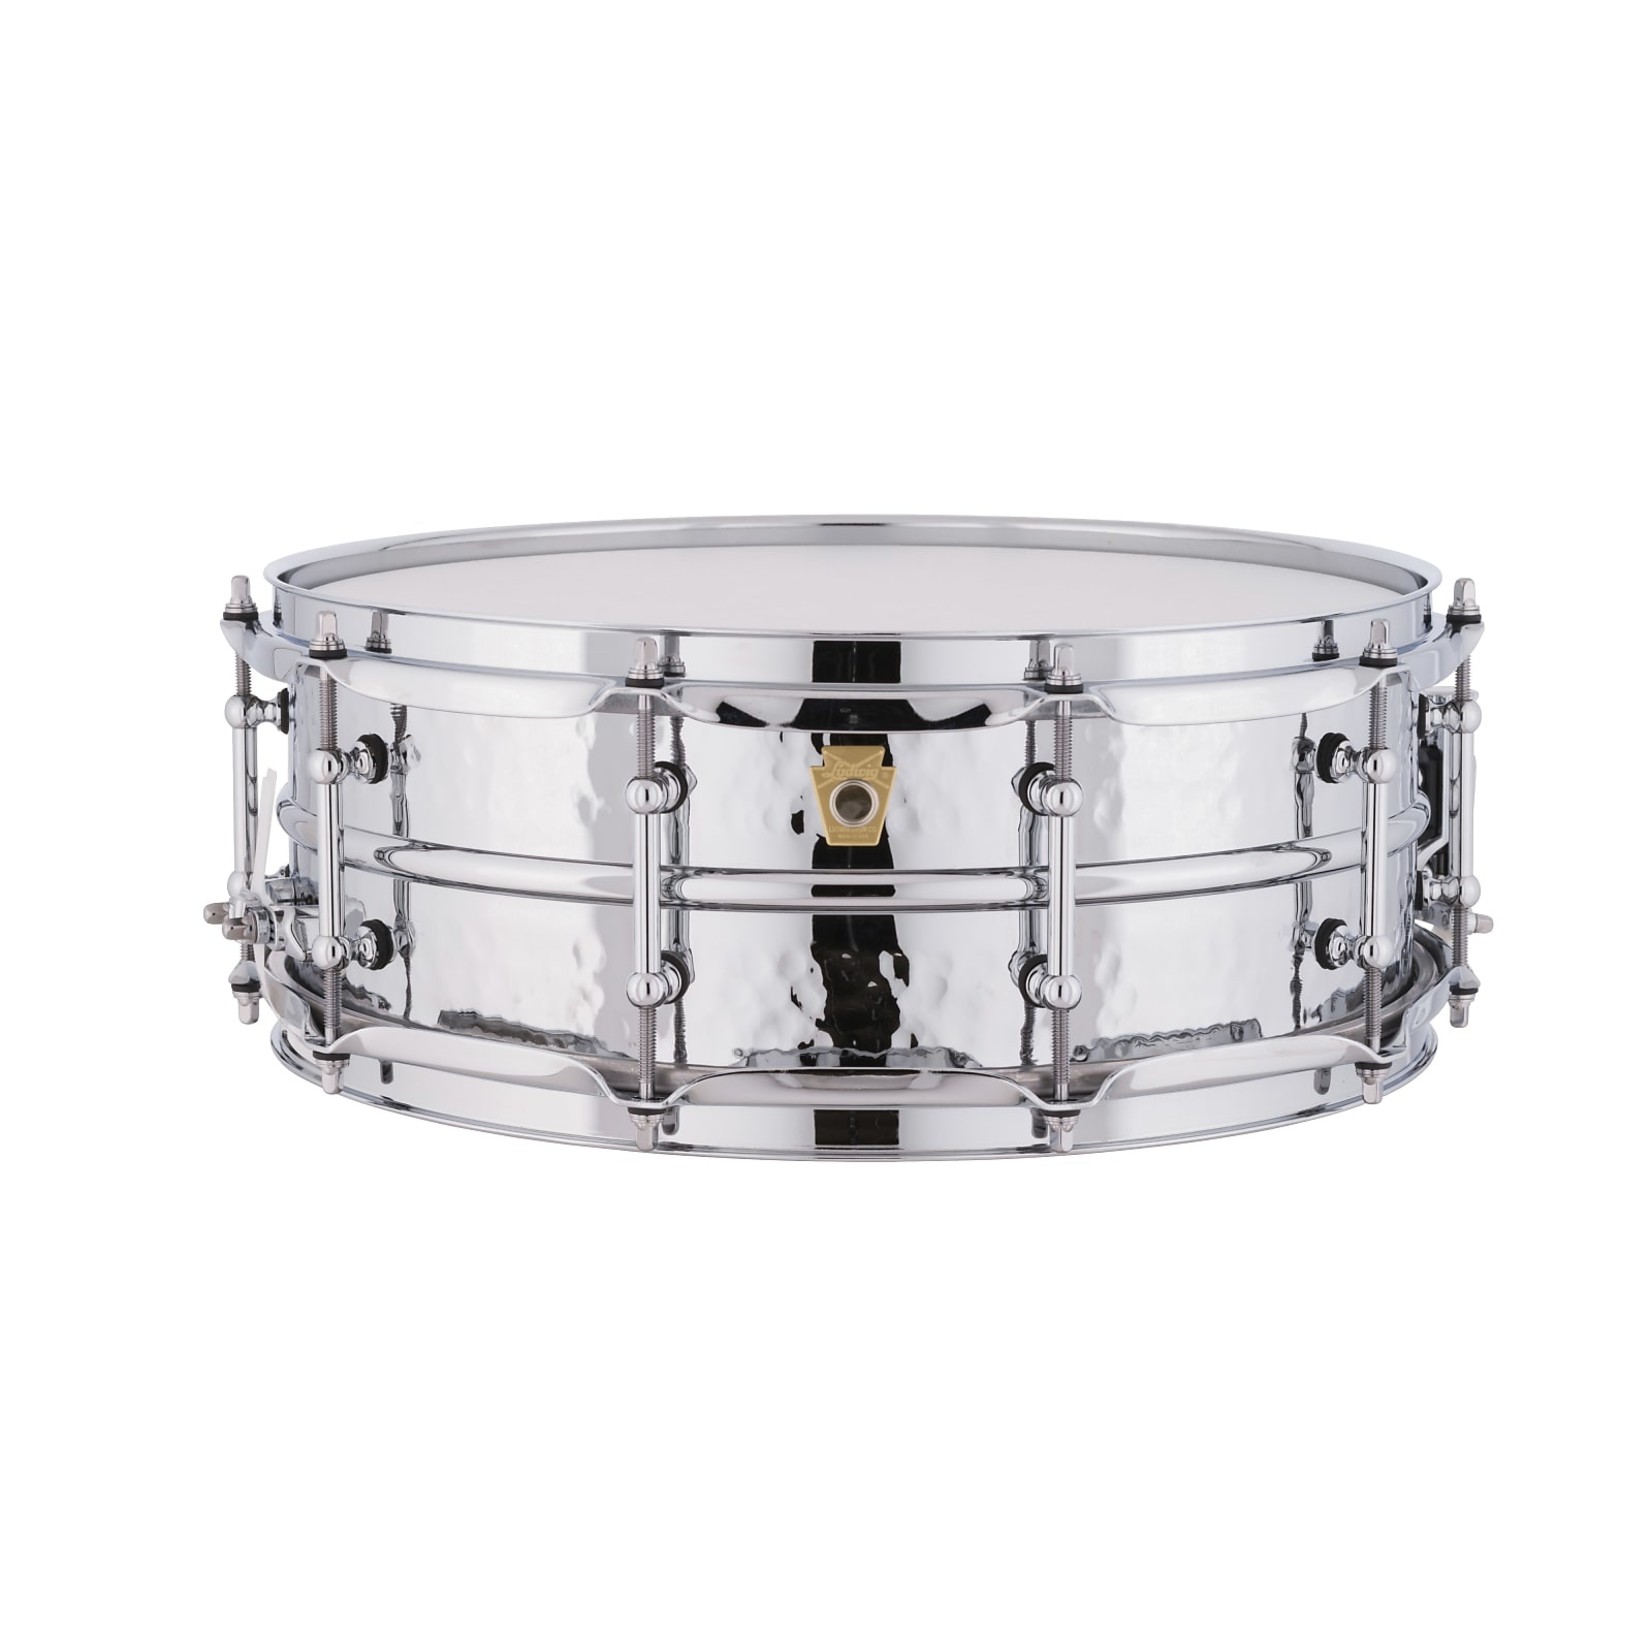 Ludwig Ludwig 5X14 Supraphonic Snare Drum / Tube Lugs / Hammered Shell